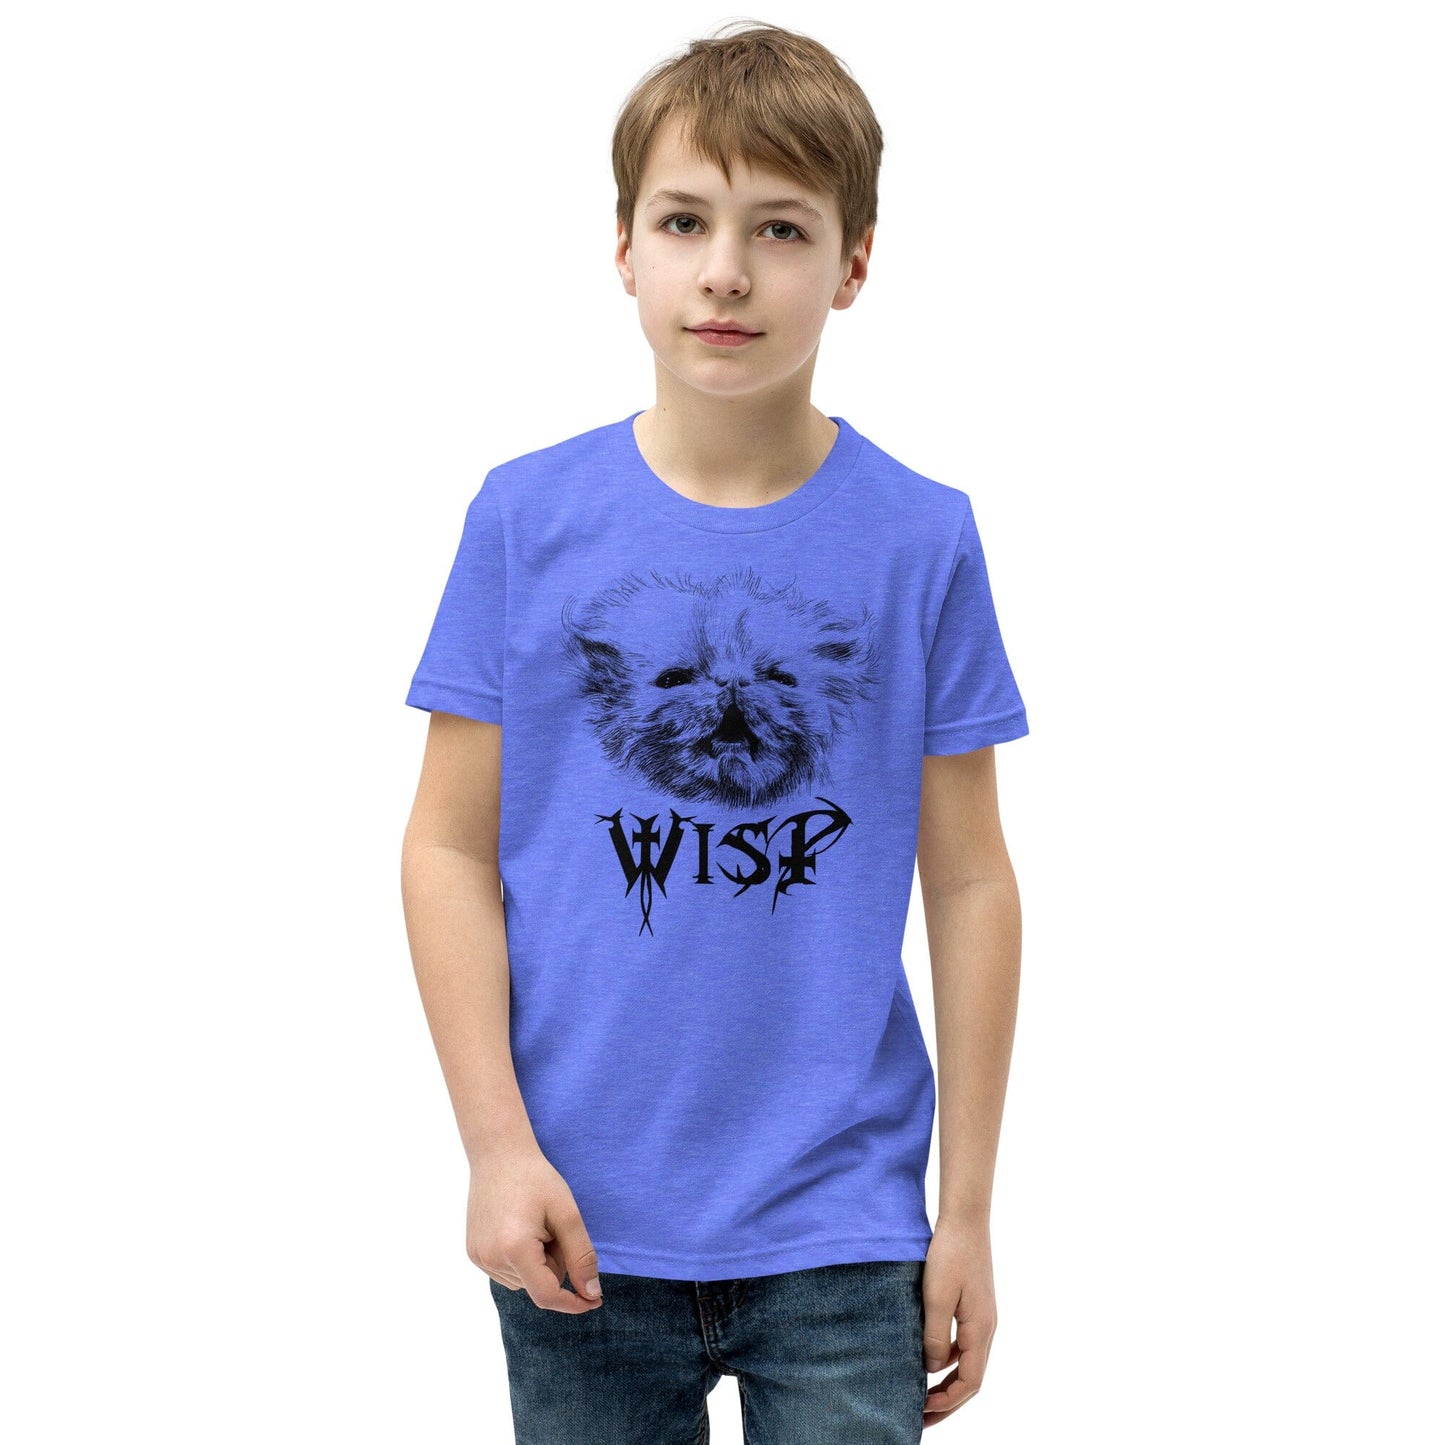 Metal Wisp YOUTH T-Shirt [Unfoiled] (All net proceeds go to Rags to Riches Animal Rescue) JoyousJoyfulJoyness Heather Columbia Blue S 